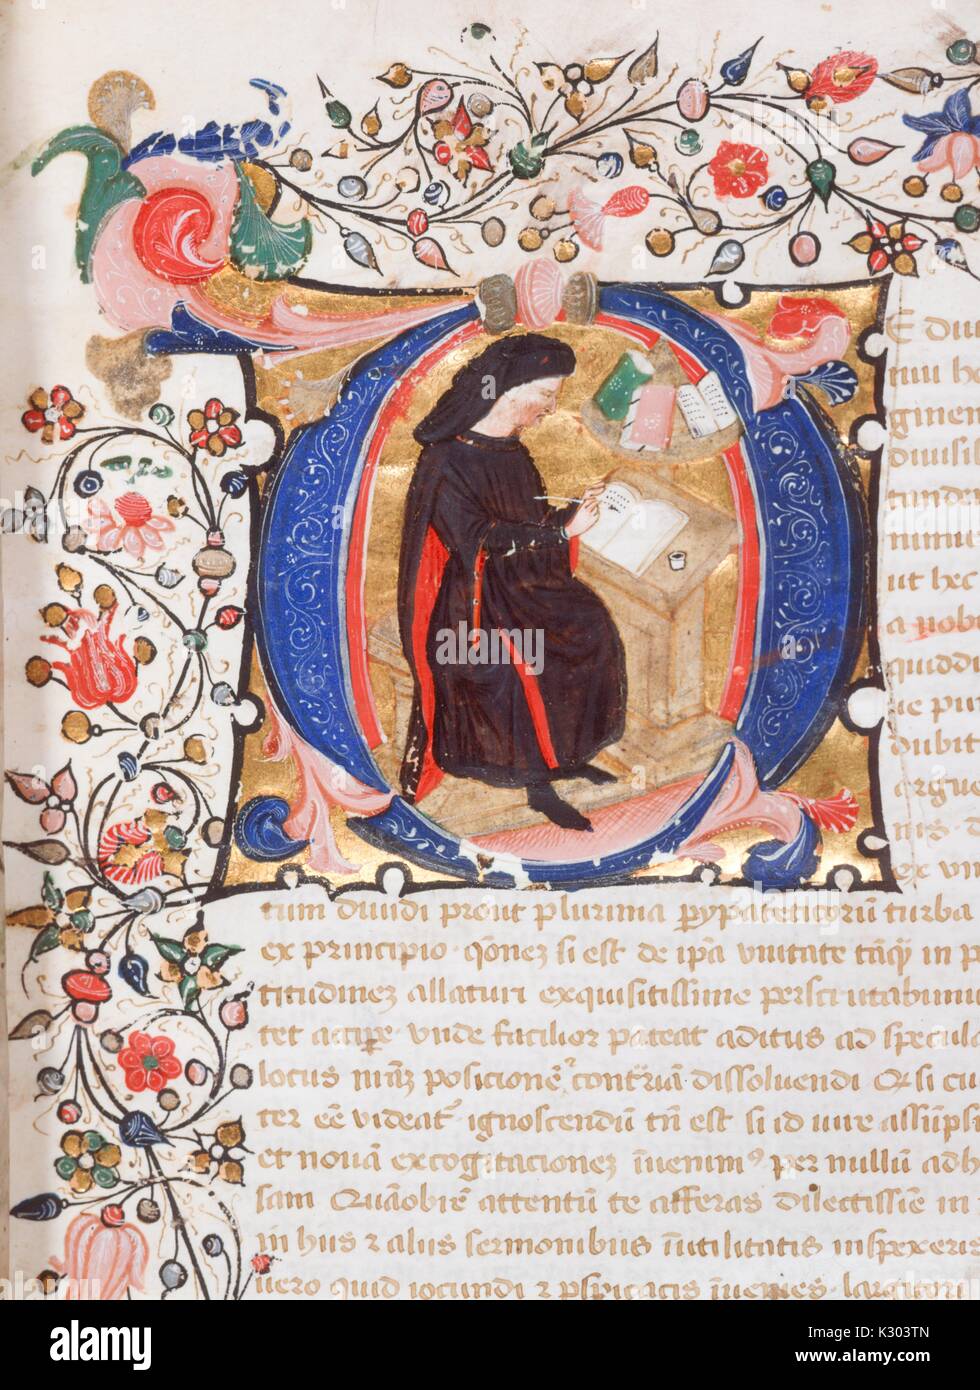 Illuminated manuscript page containing text, an ornate border, and an illustration of a scribe at work, from la ate 14th century Latin manuscript book written in Italy, 1380. Stock Photo